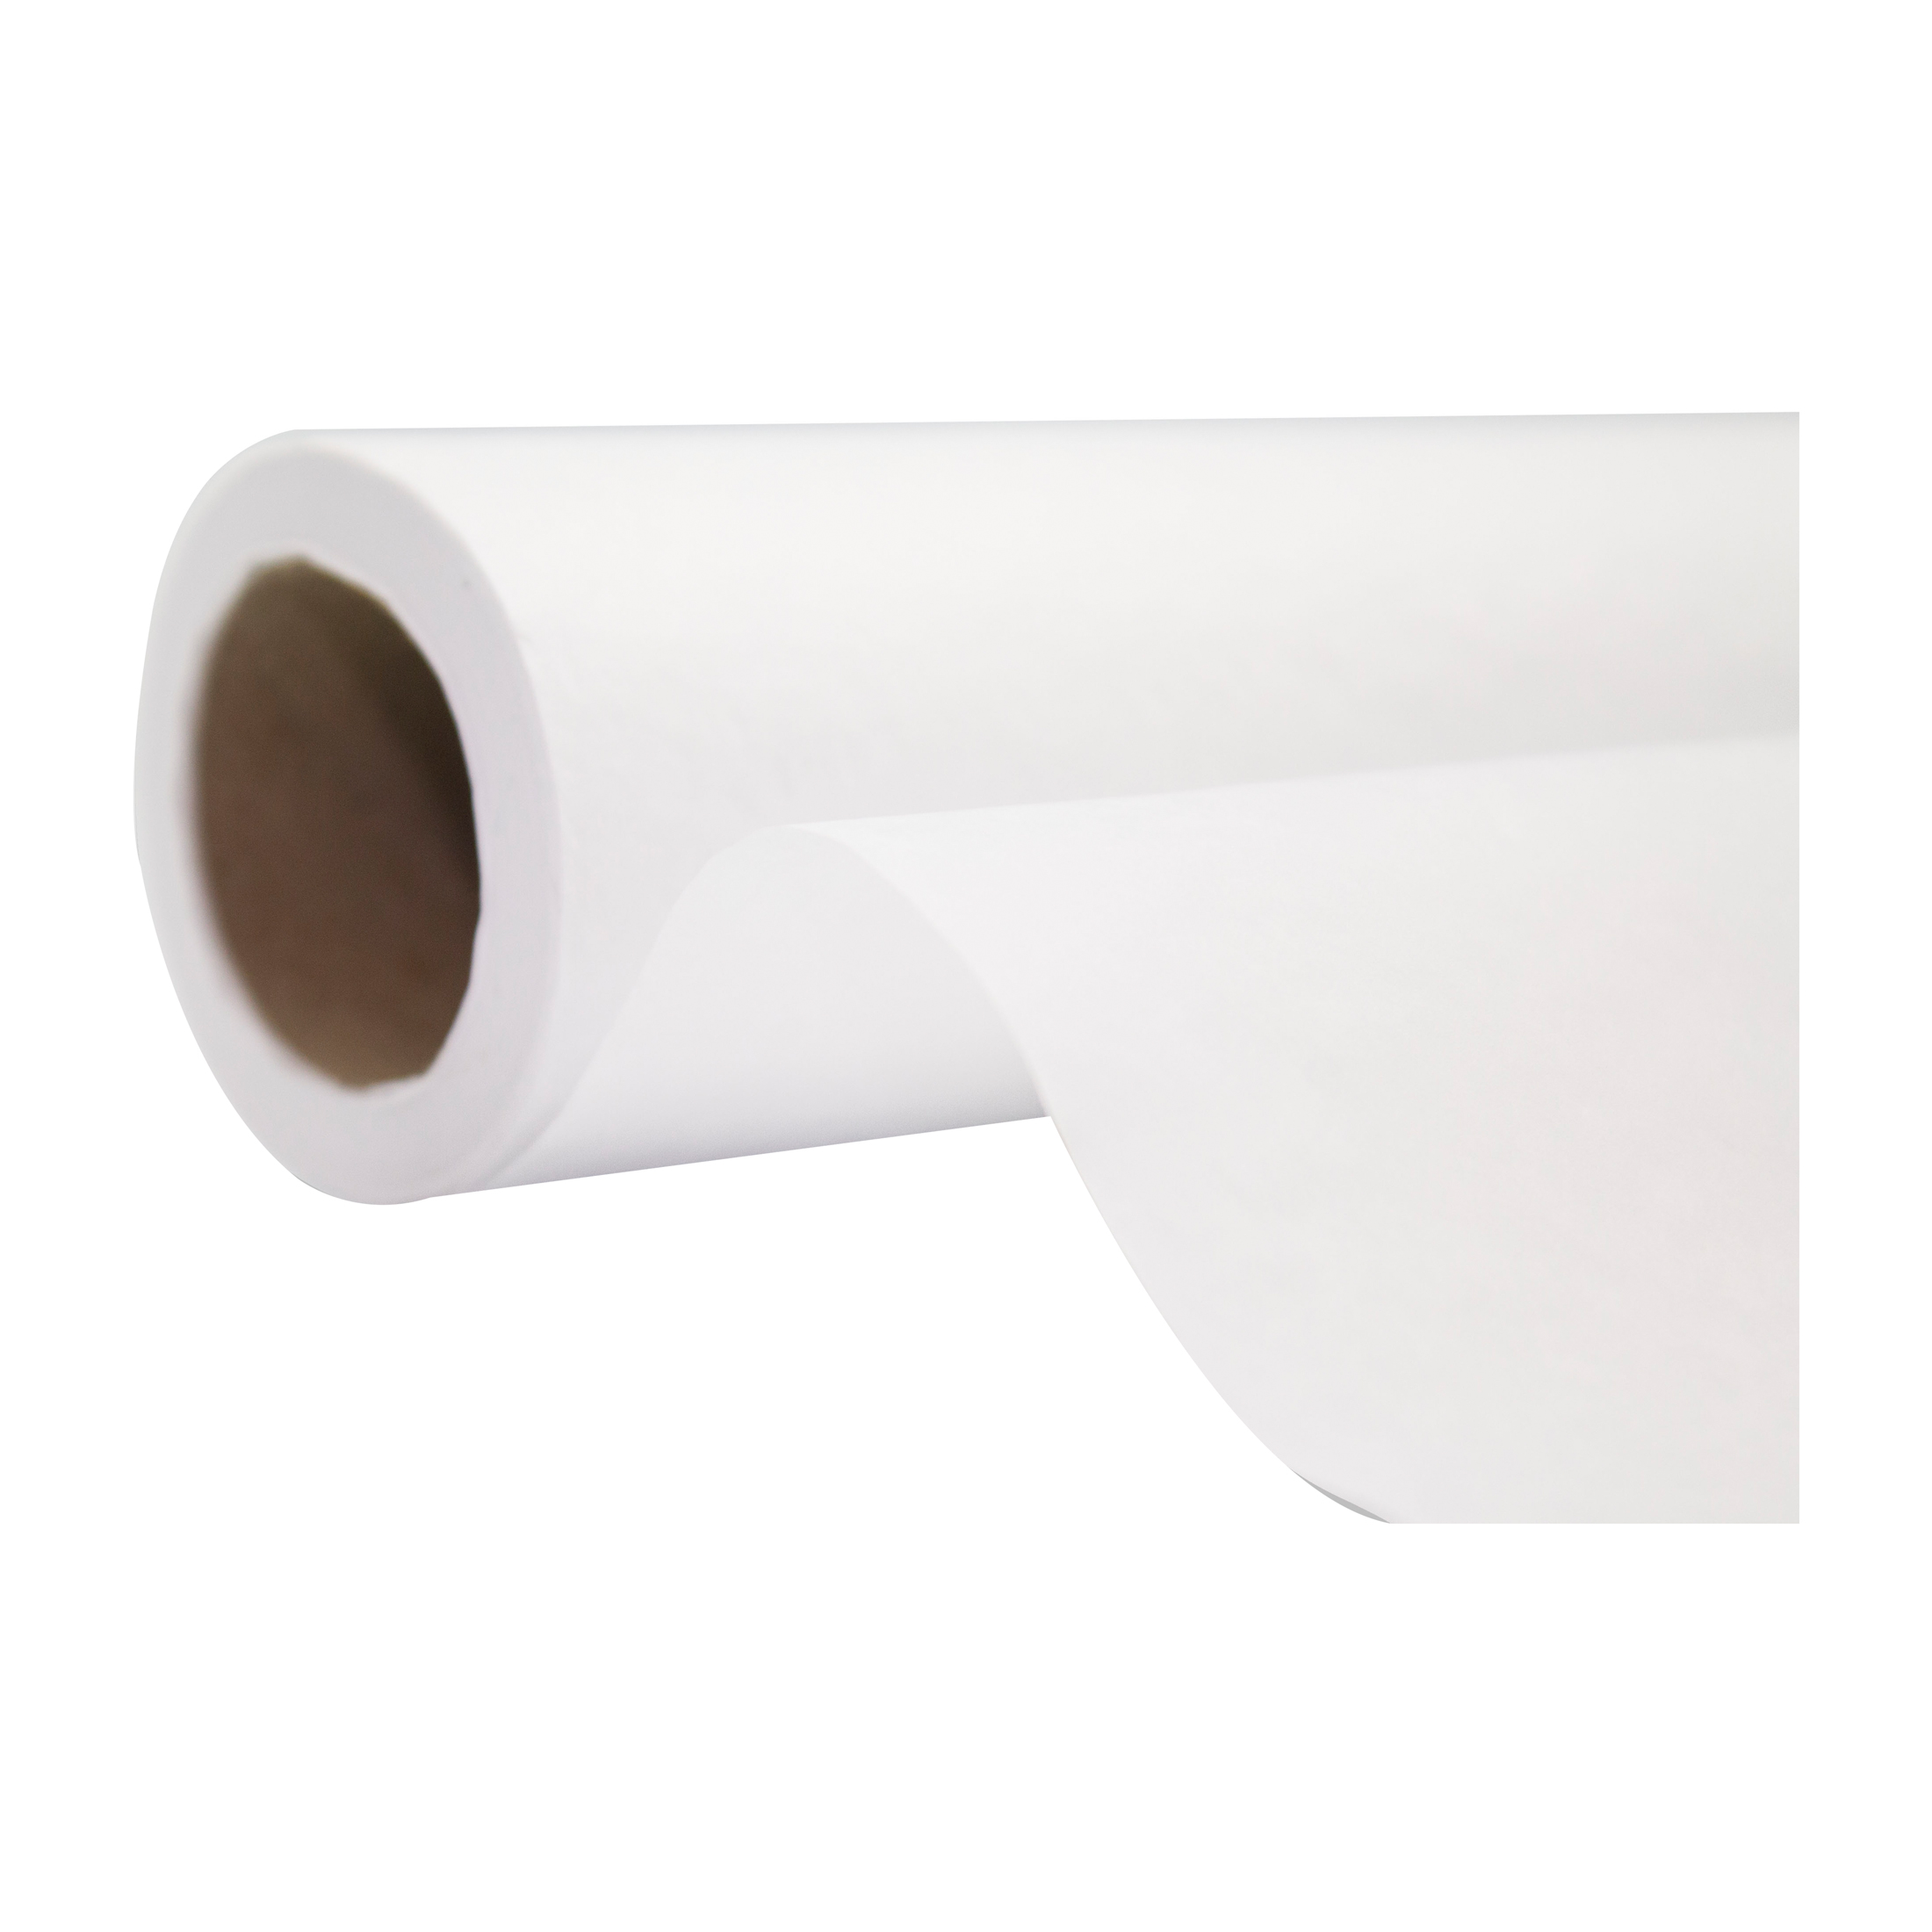 DUKAL Reflections™ Waxing Paper Roll, 3.5 x 100 Yards